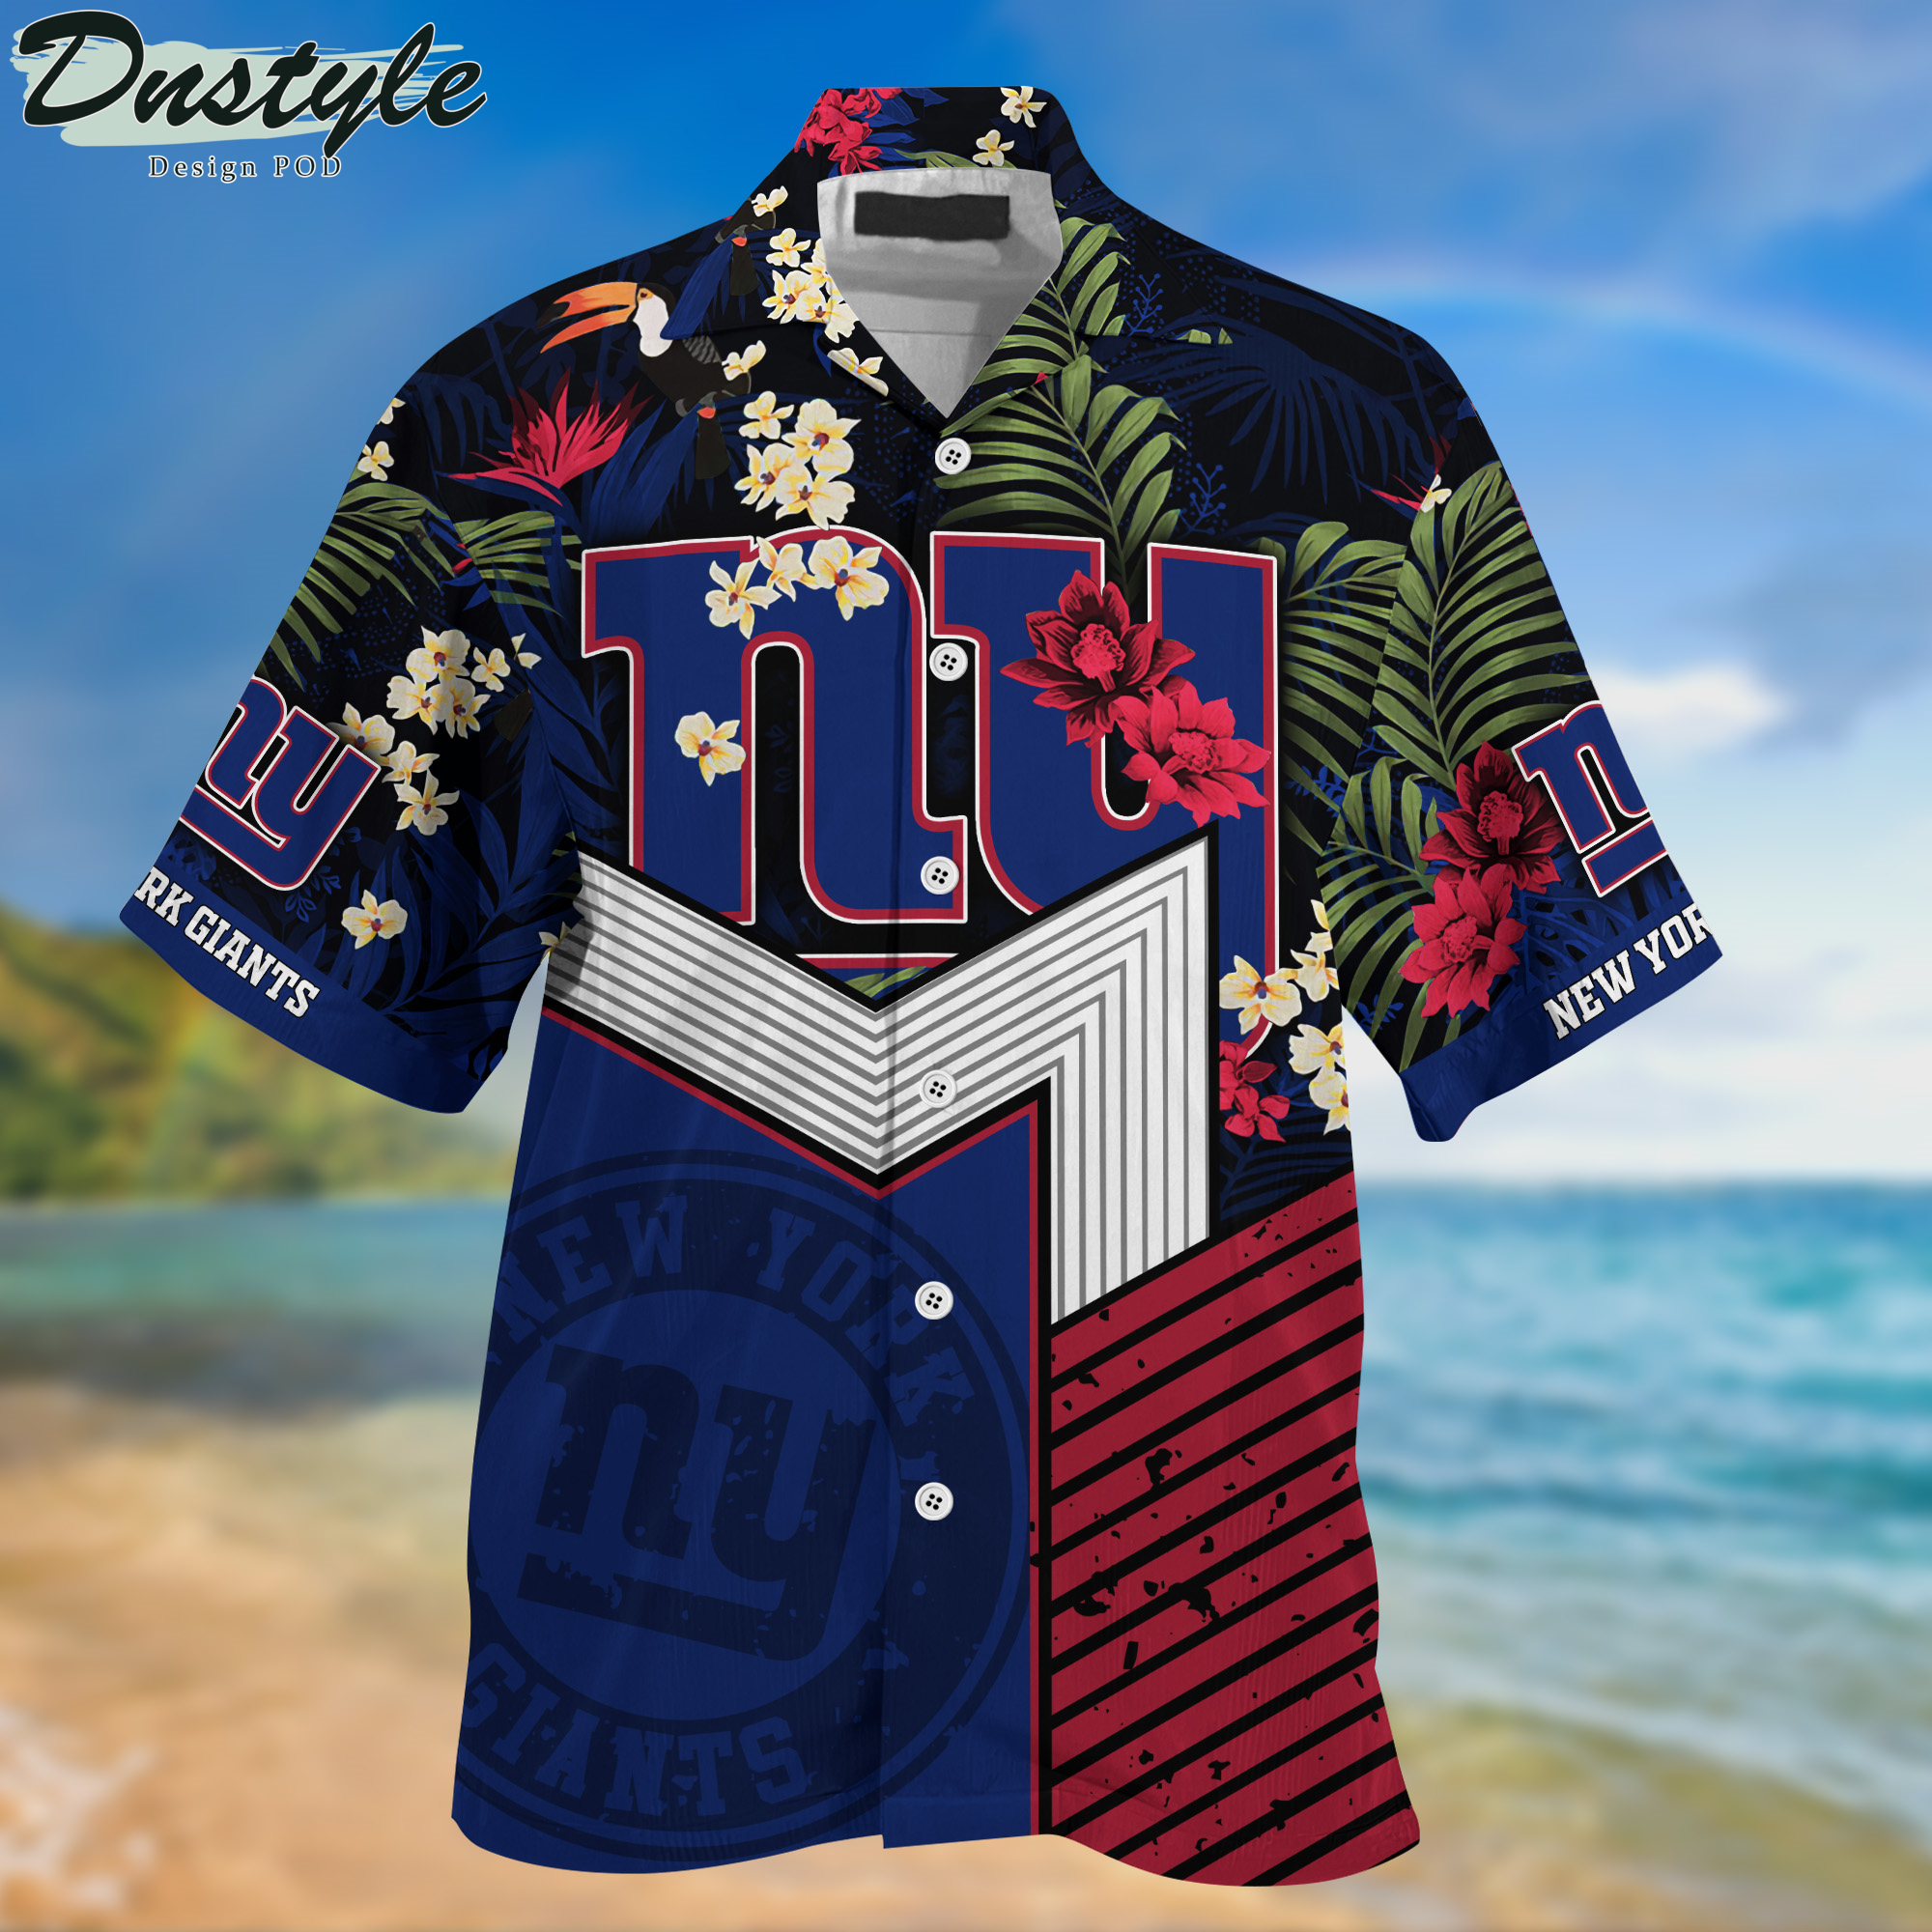 New York Giants Hawaii Shirt And Shorts New Collection